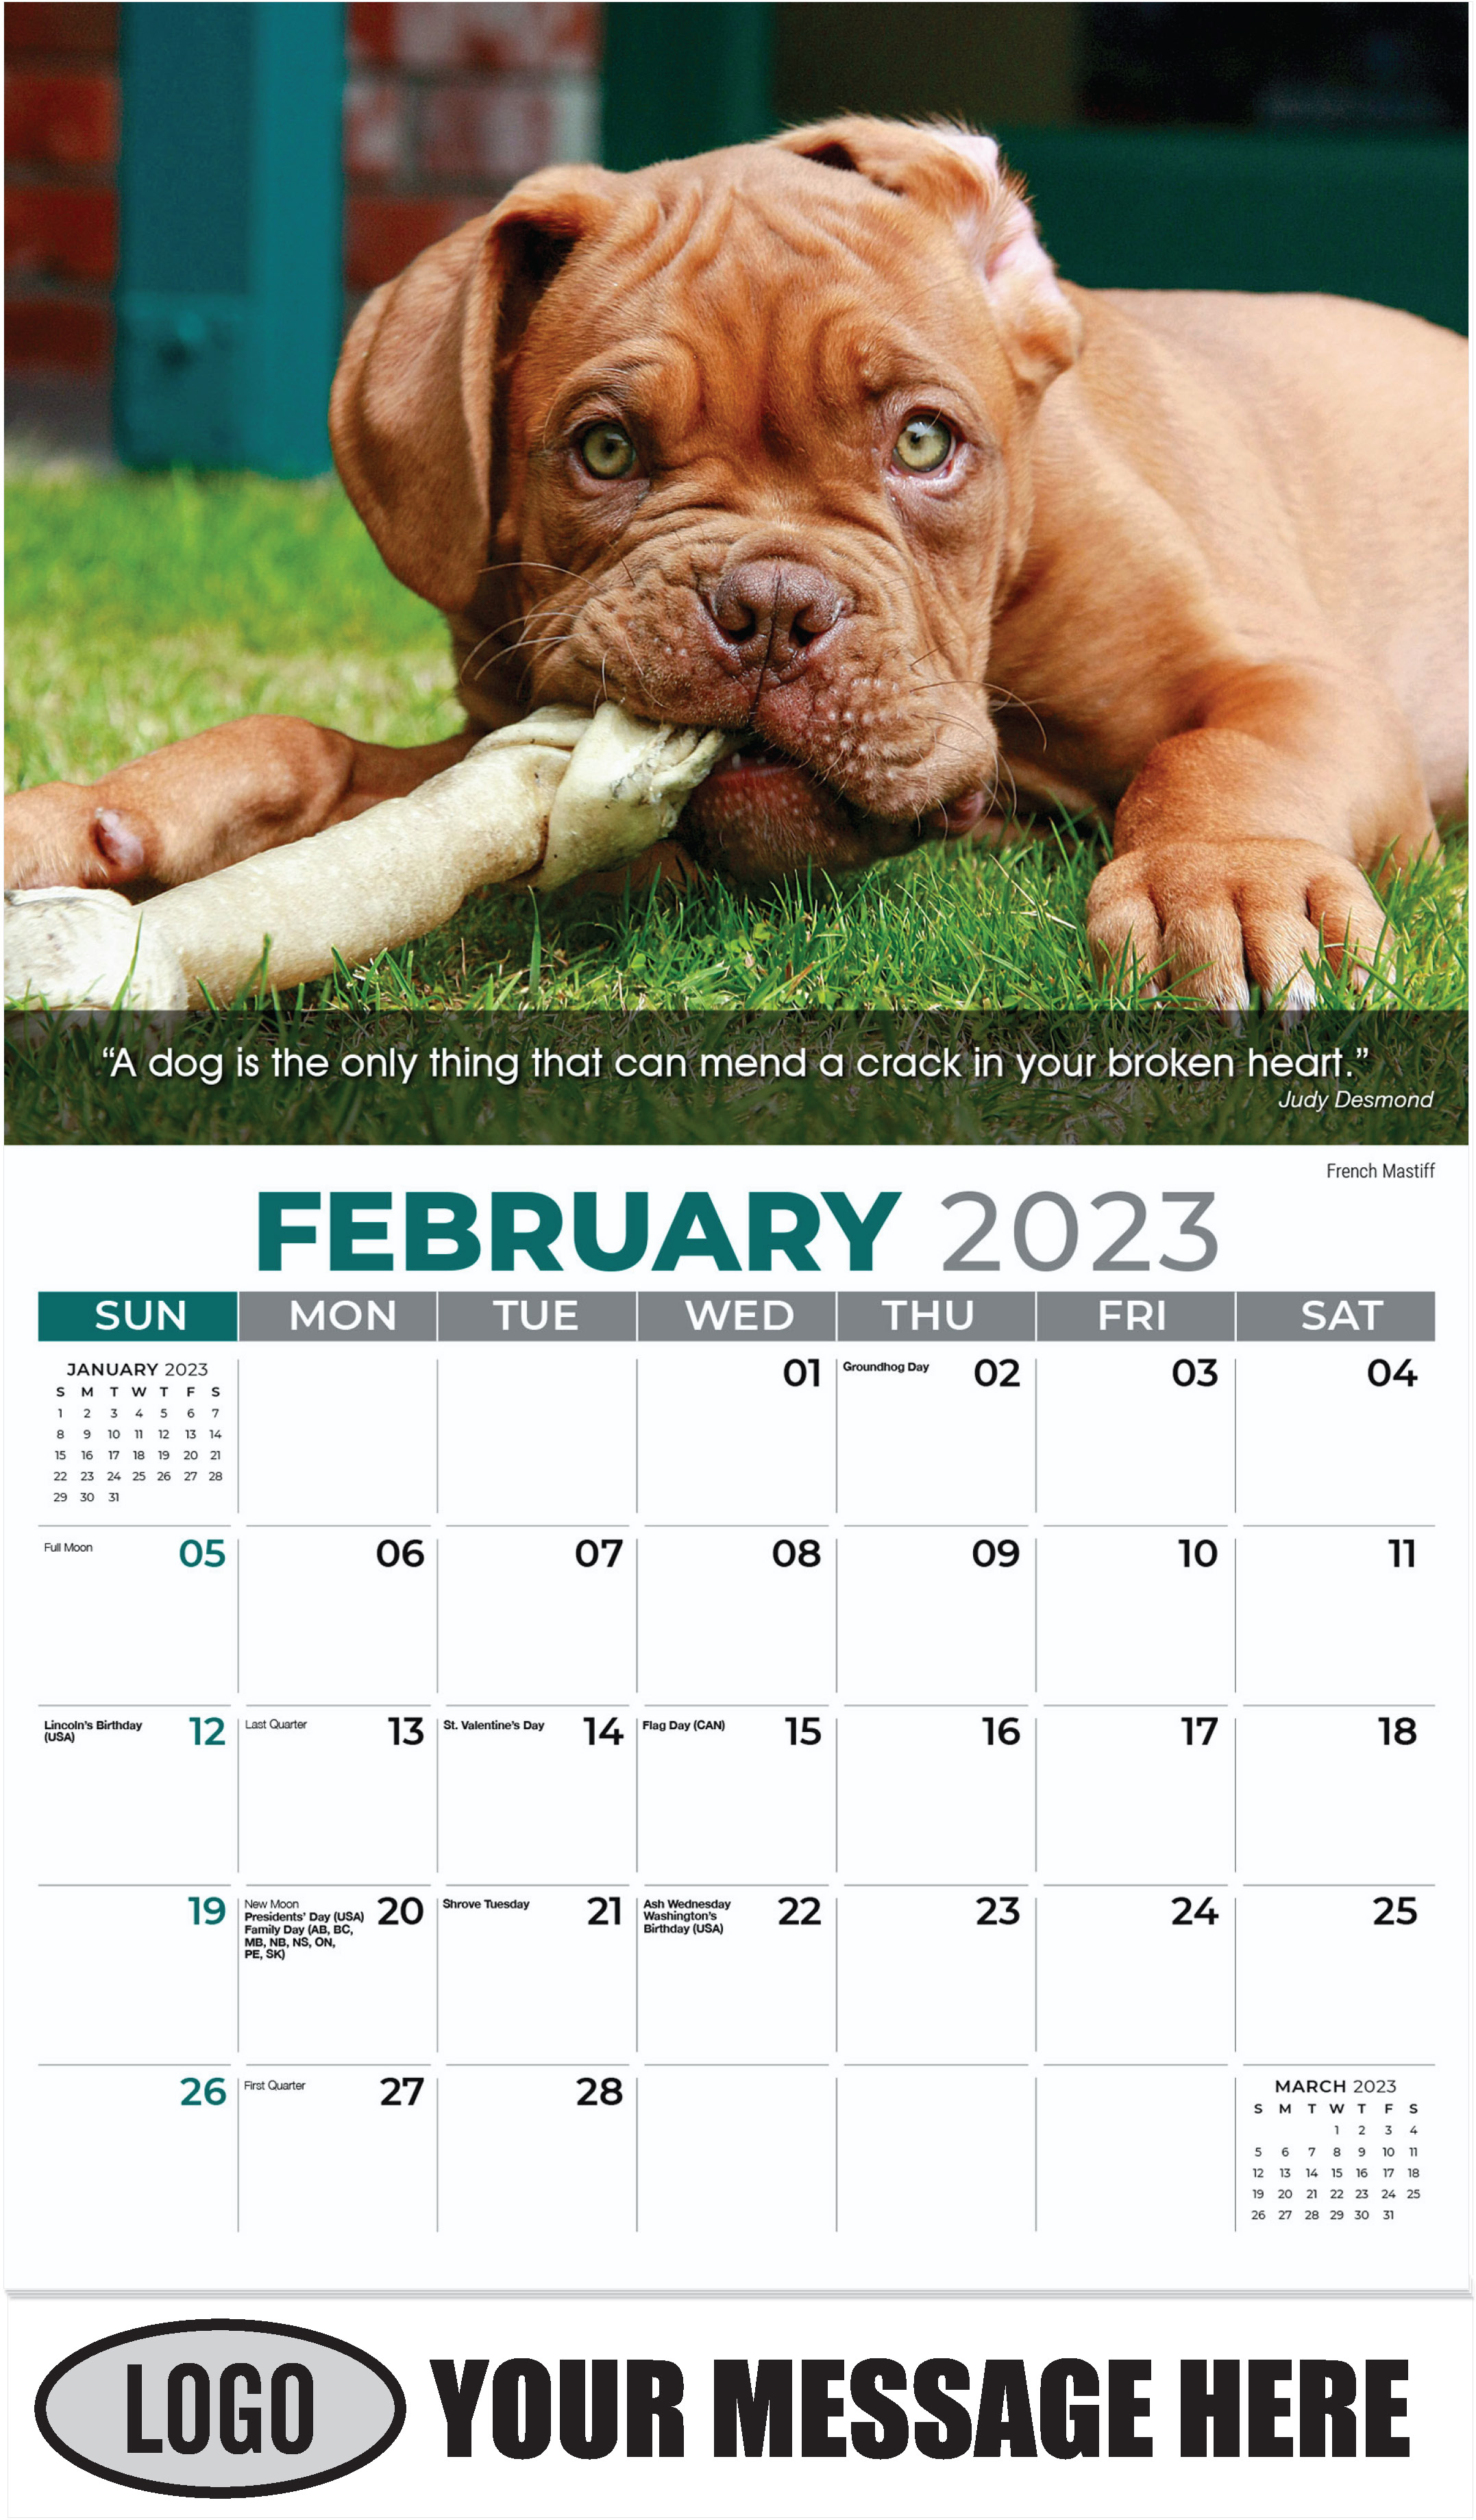 French Mastiff - February - Dogs, ''Man's Best Friends'' 2023 Promotional Calendar